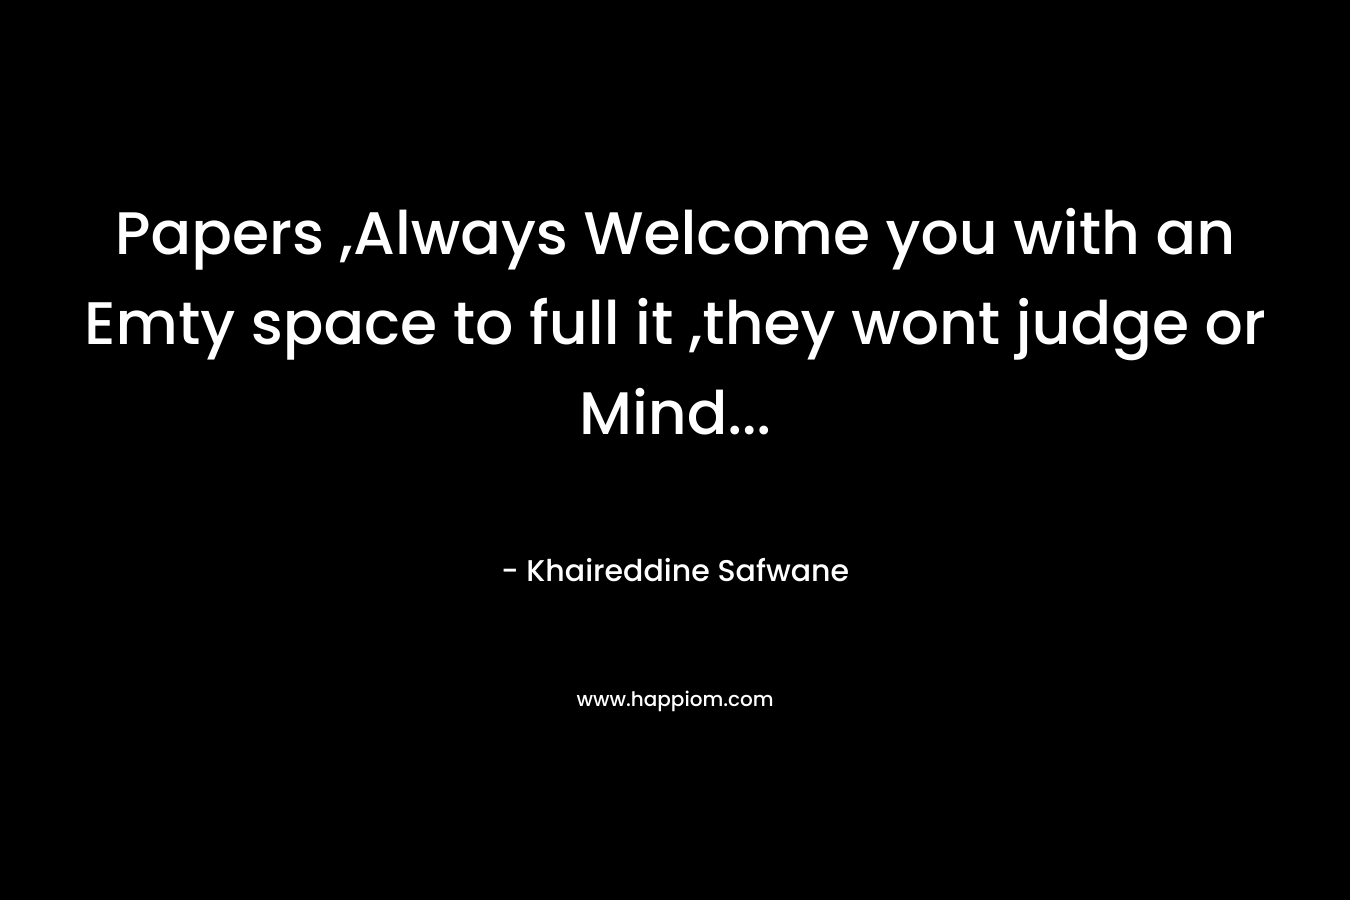 Papers ,Always Welcome you with an Emty space to full it ,they wont judge or Mind… – Khaireddine Safwane